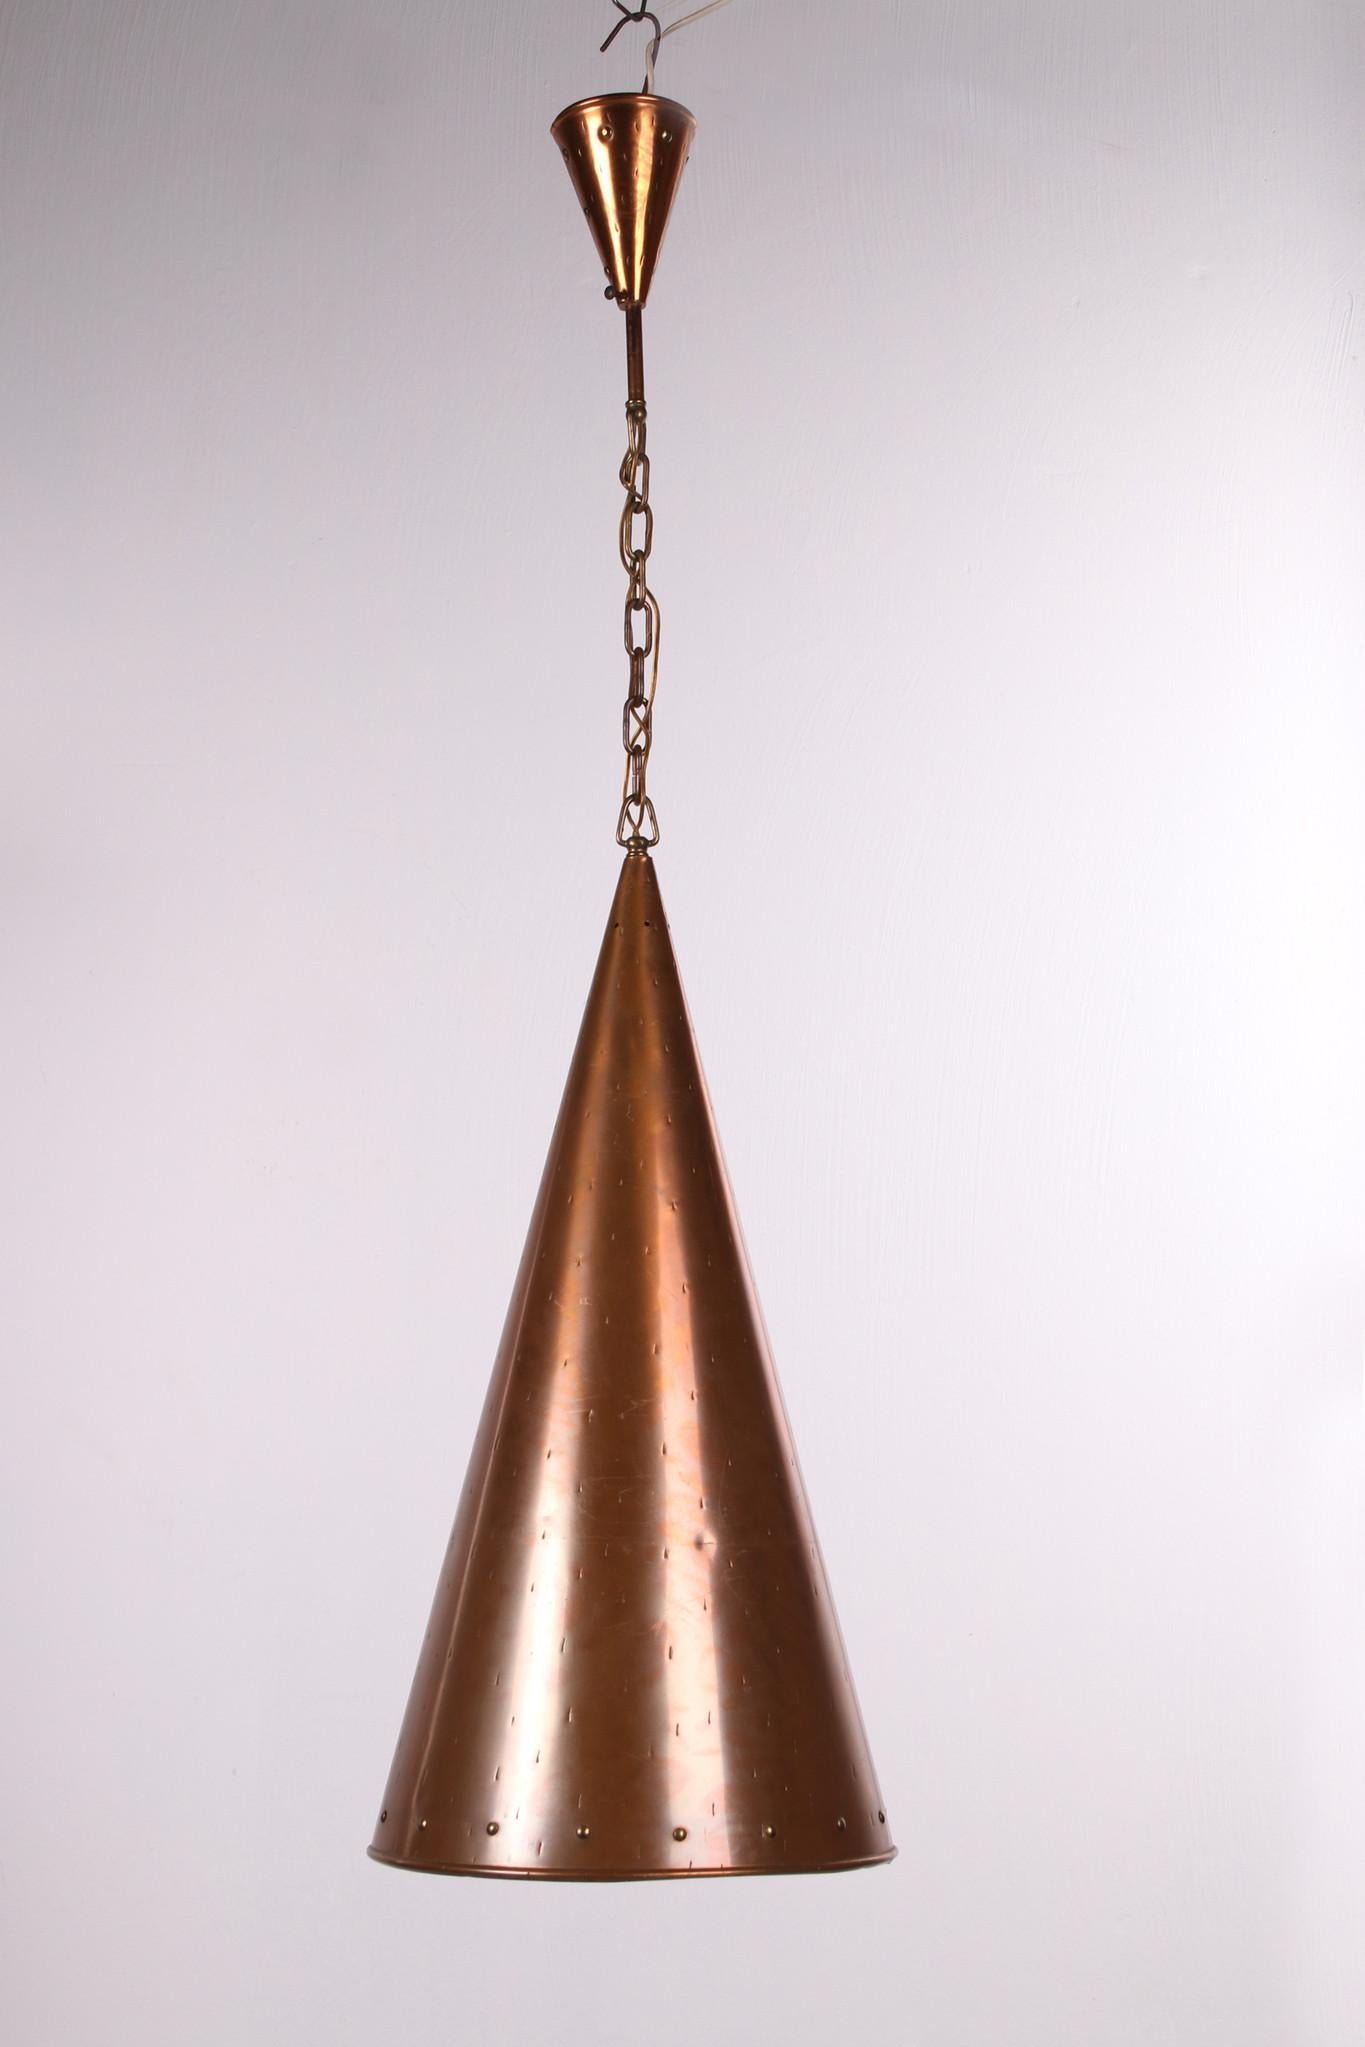 Danish Hand Hammered Copper Pendant Lamp from E.S Horn Aalestrup, 50s For Sale 8